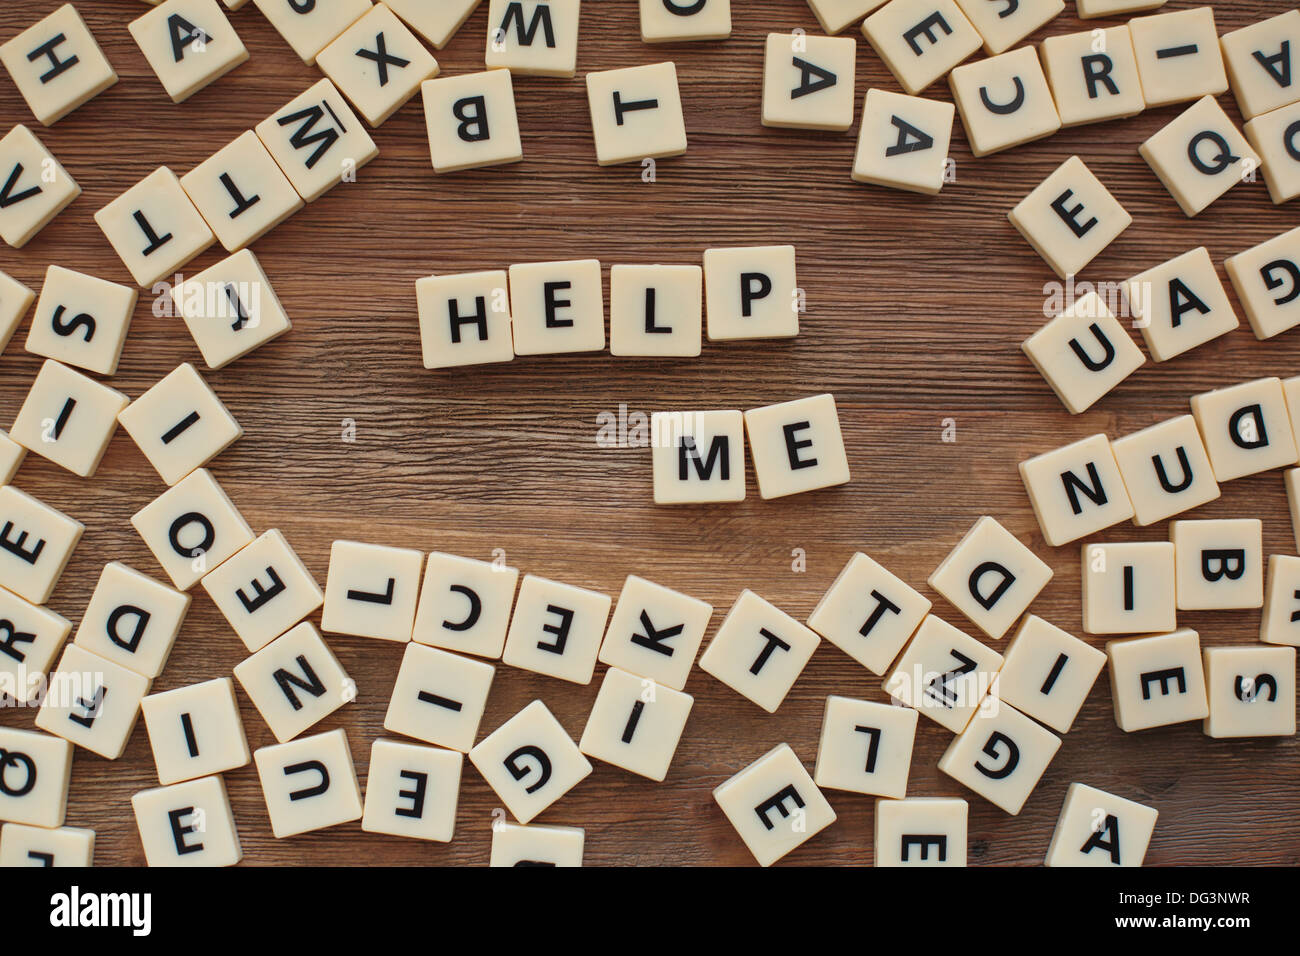 Plastic letters from a childrens' spelling game on a wooden table spell  'help me' Stock Photo